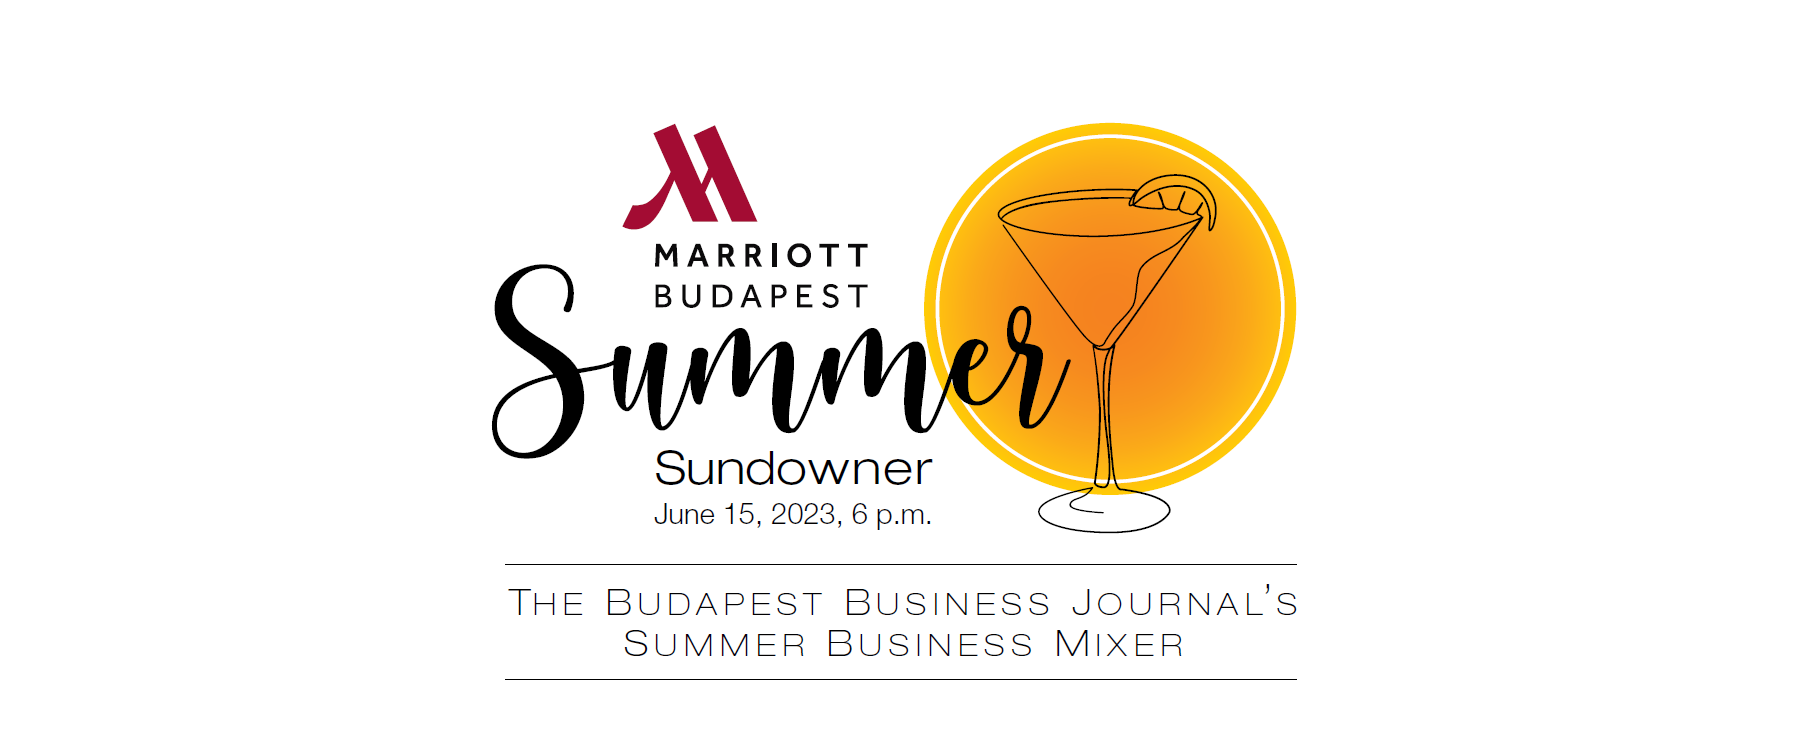 BBJ Summer Sundowner: Networking and Scenic Views at Marriot...